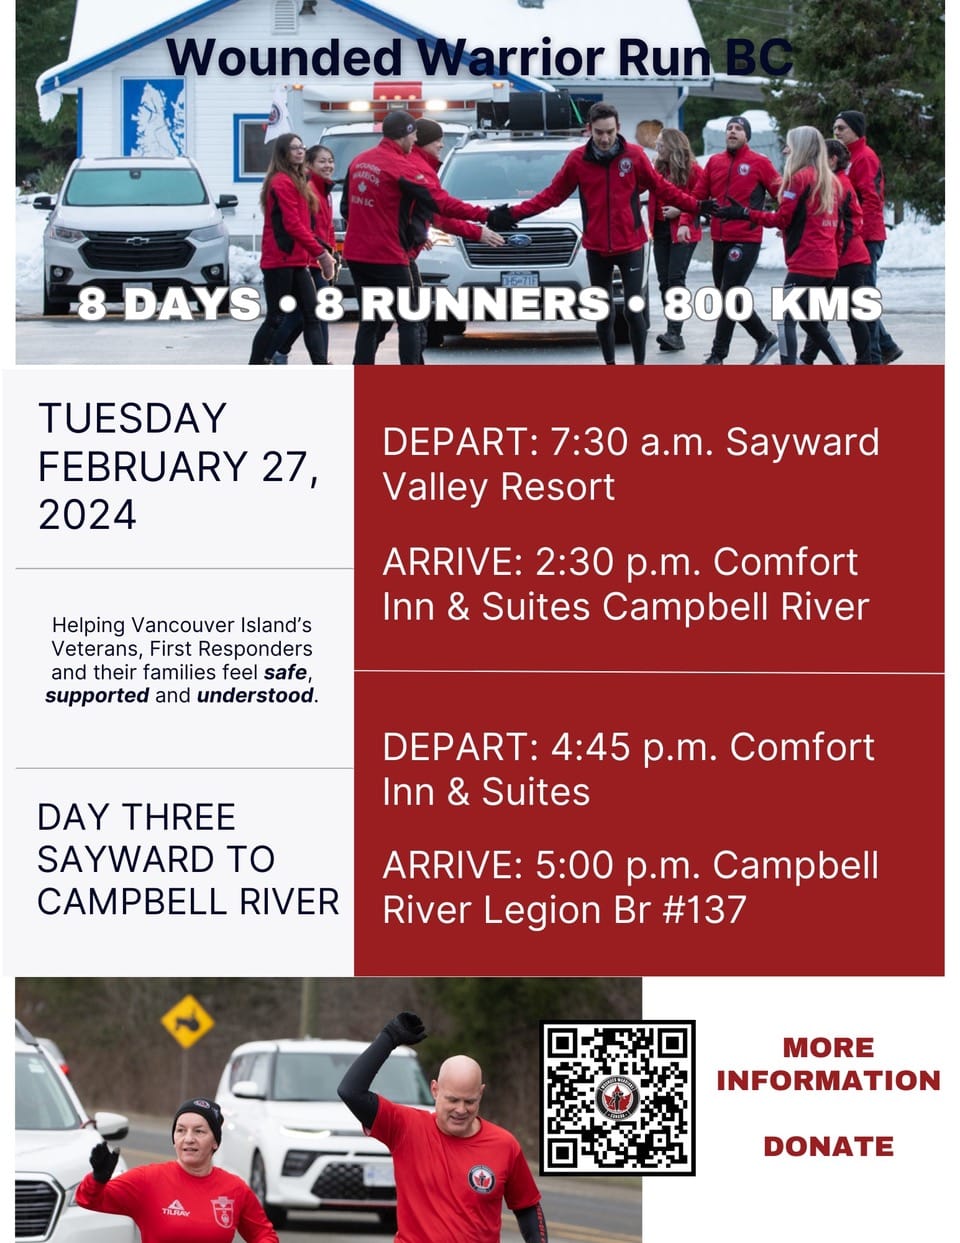 Wounded Warriors Run BC - Tuesday February 27, 2024 Day 3 Sayward to Campbell River